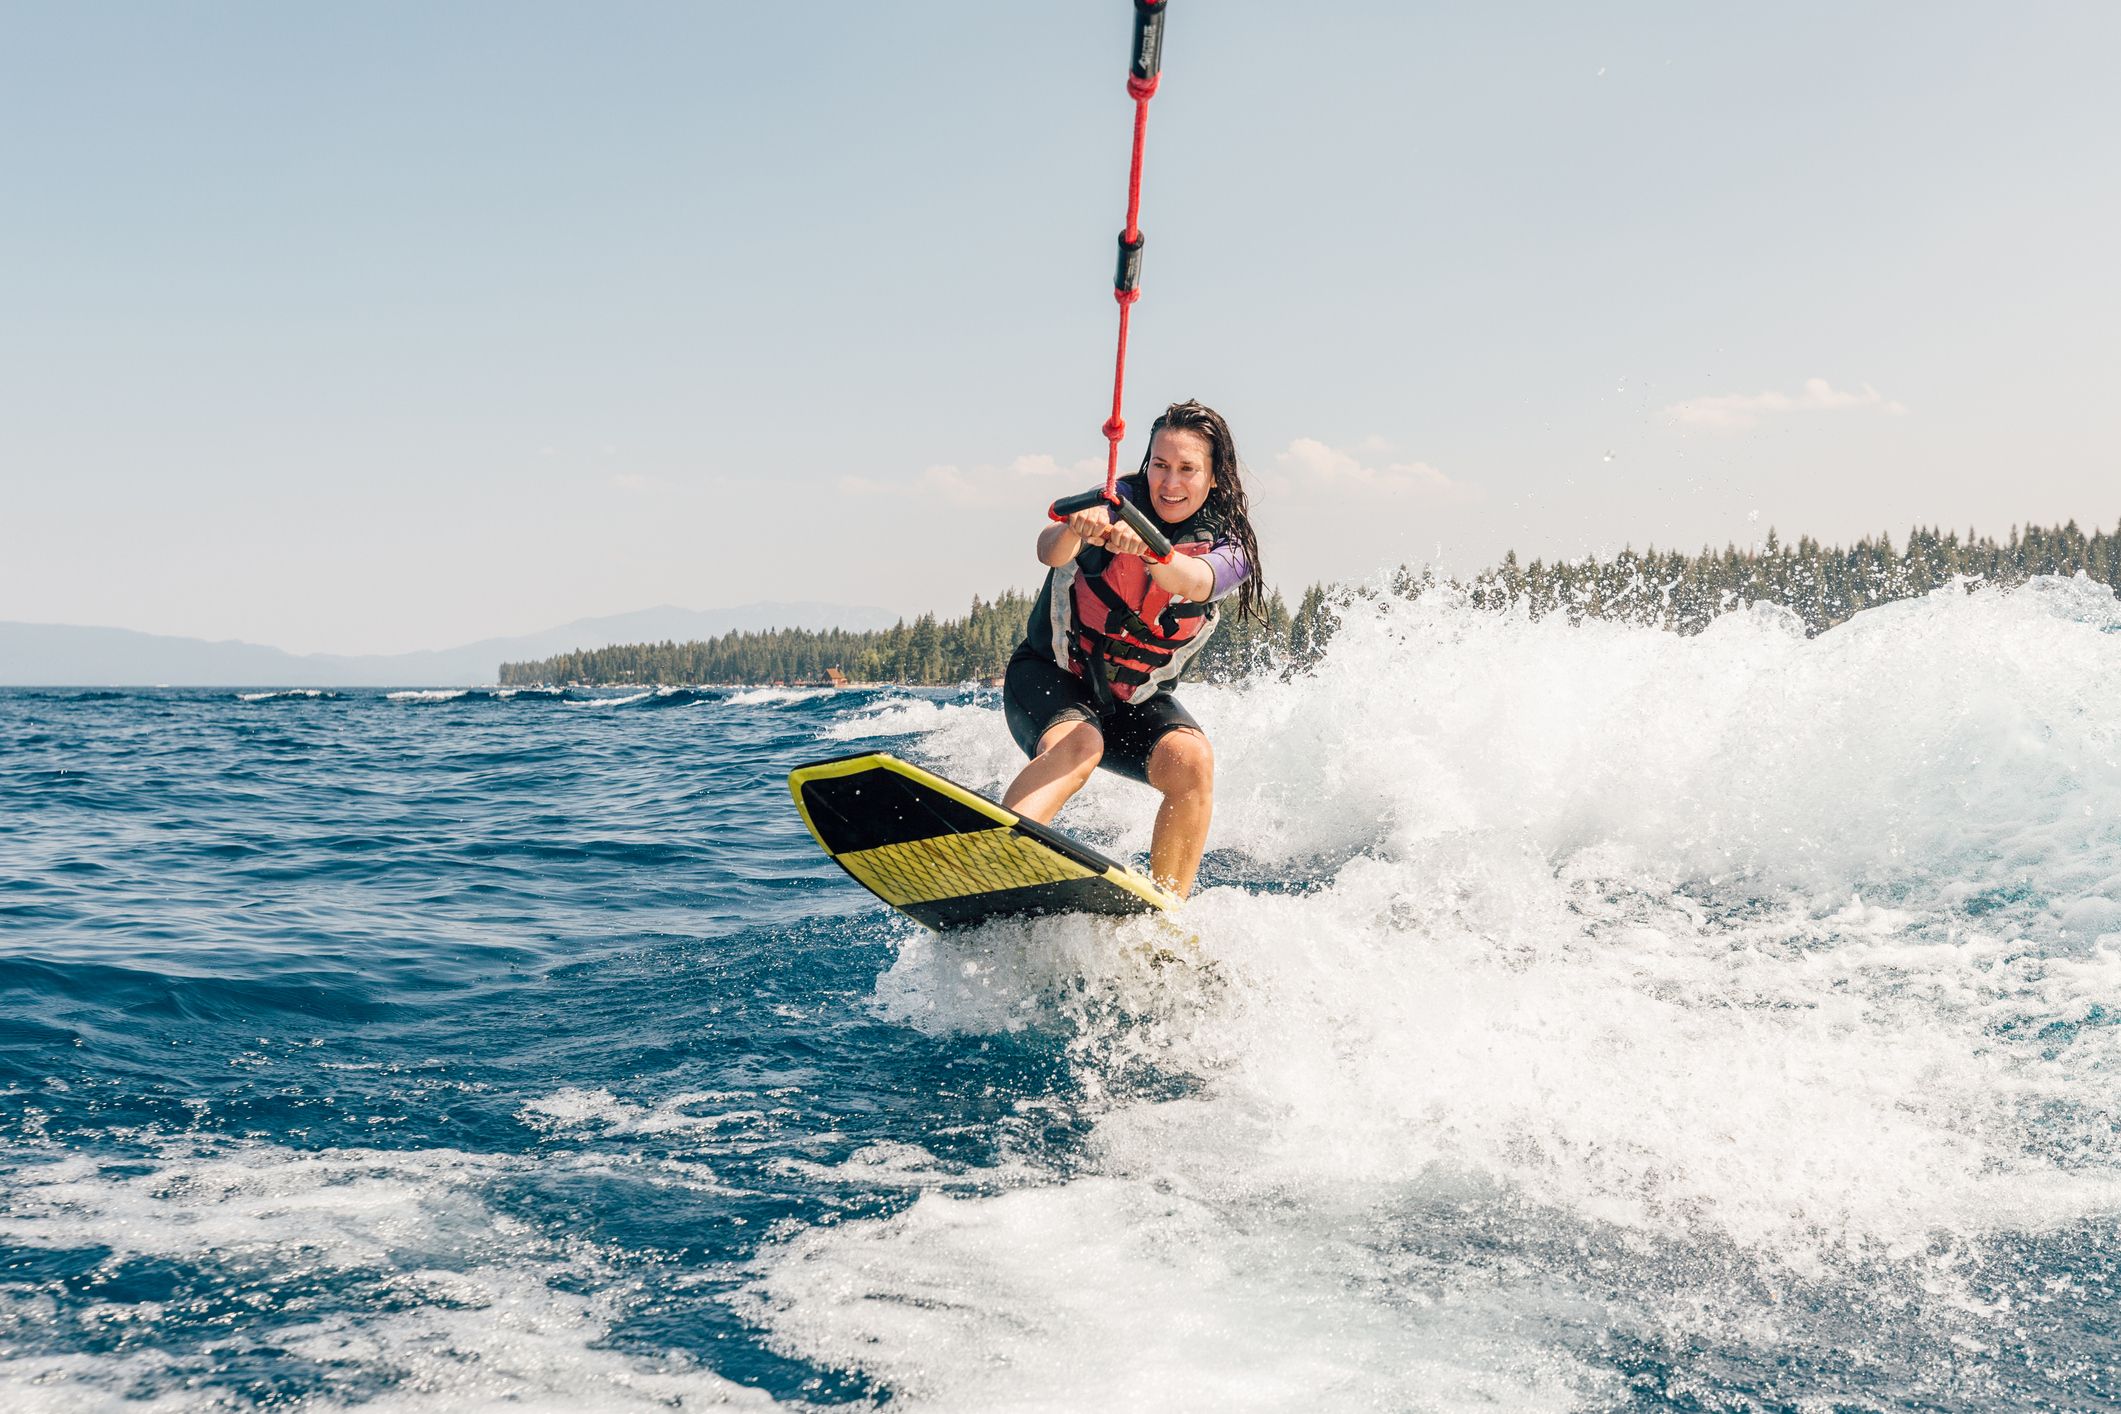 Top 15 Exciting Water Sports Activities To Try In Your Next Vacation!